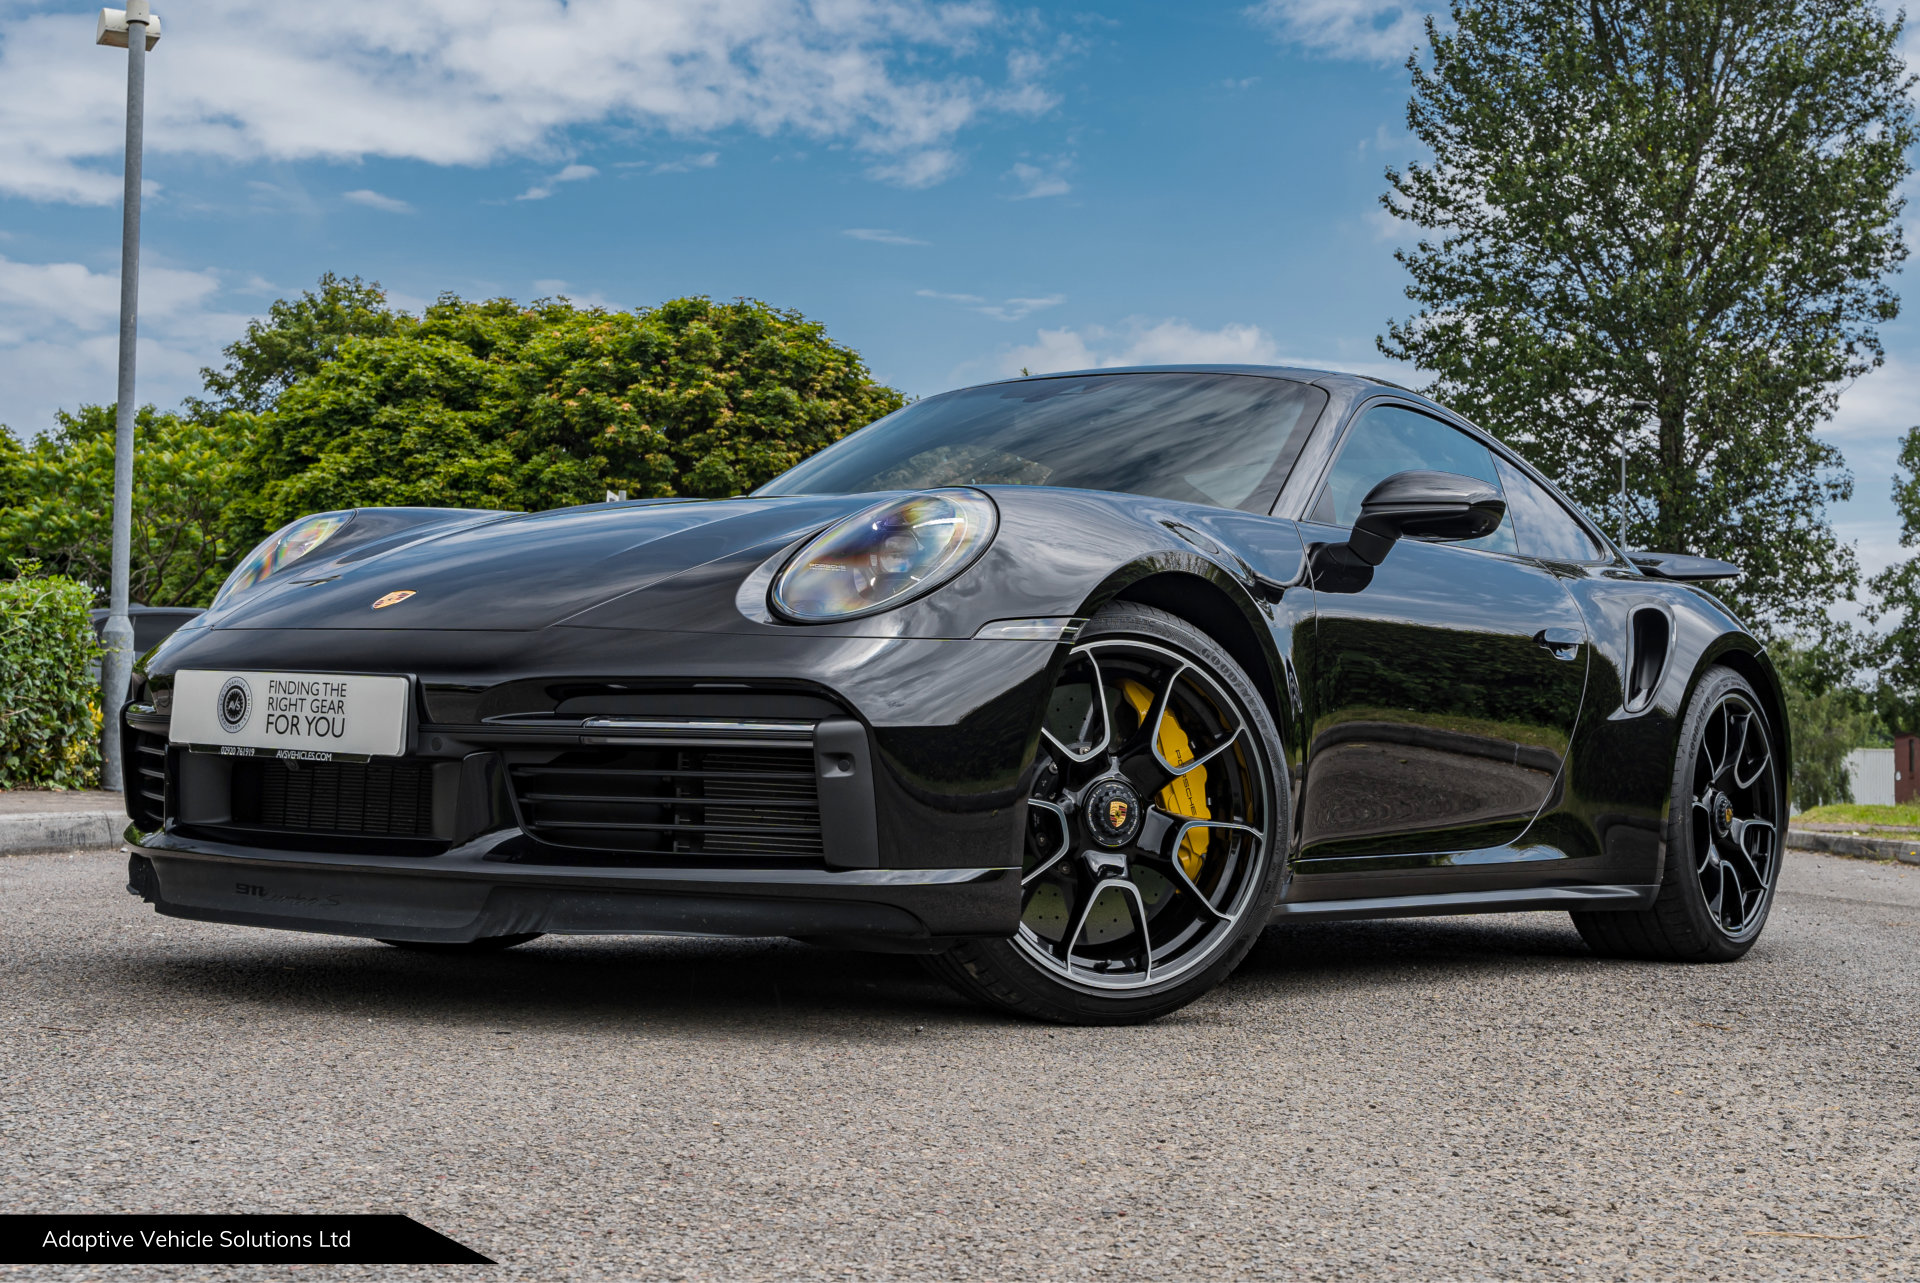 2020 Porsche 911 992 Turbo S Coupe Black near side front wide view